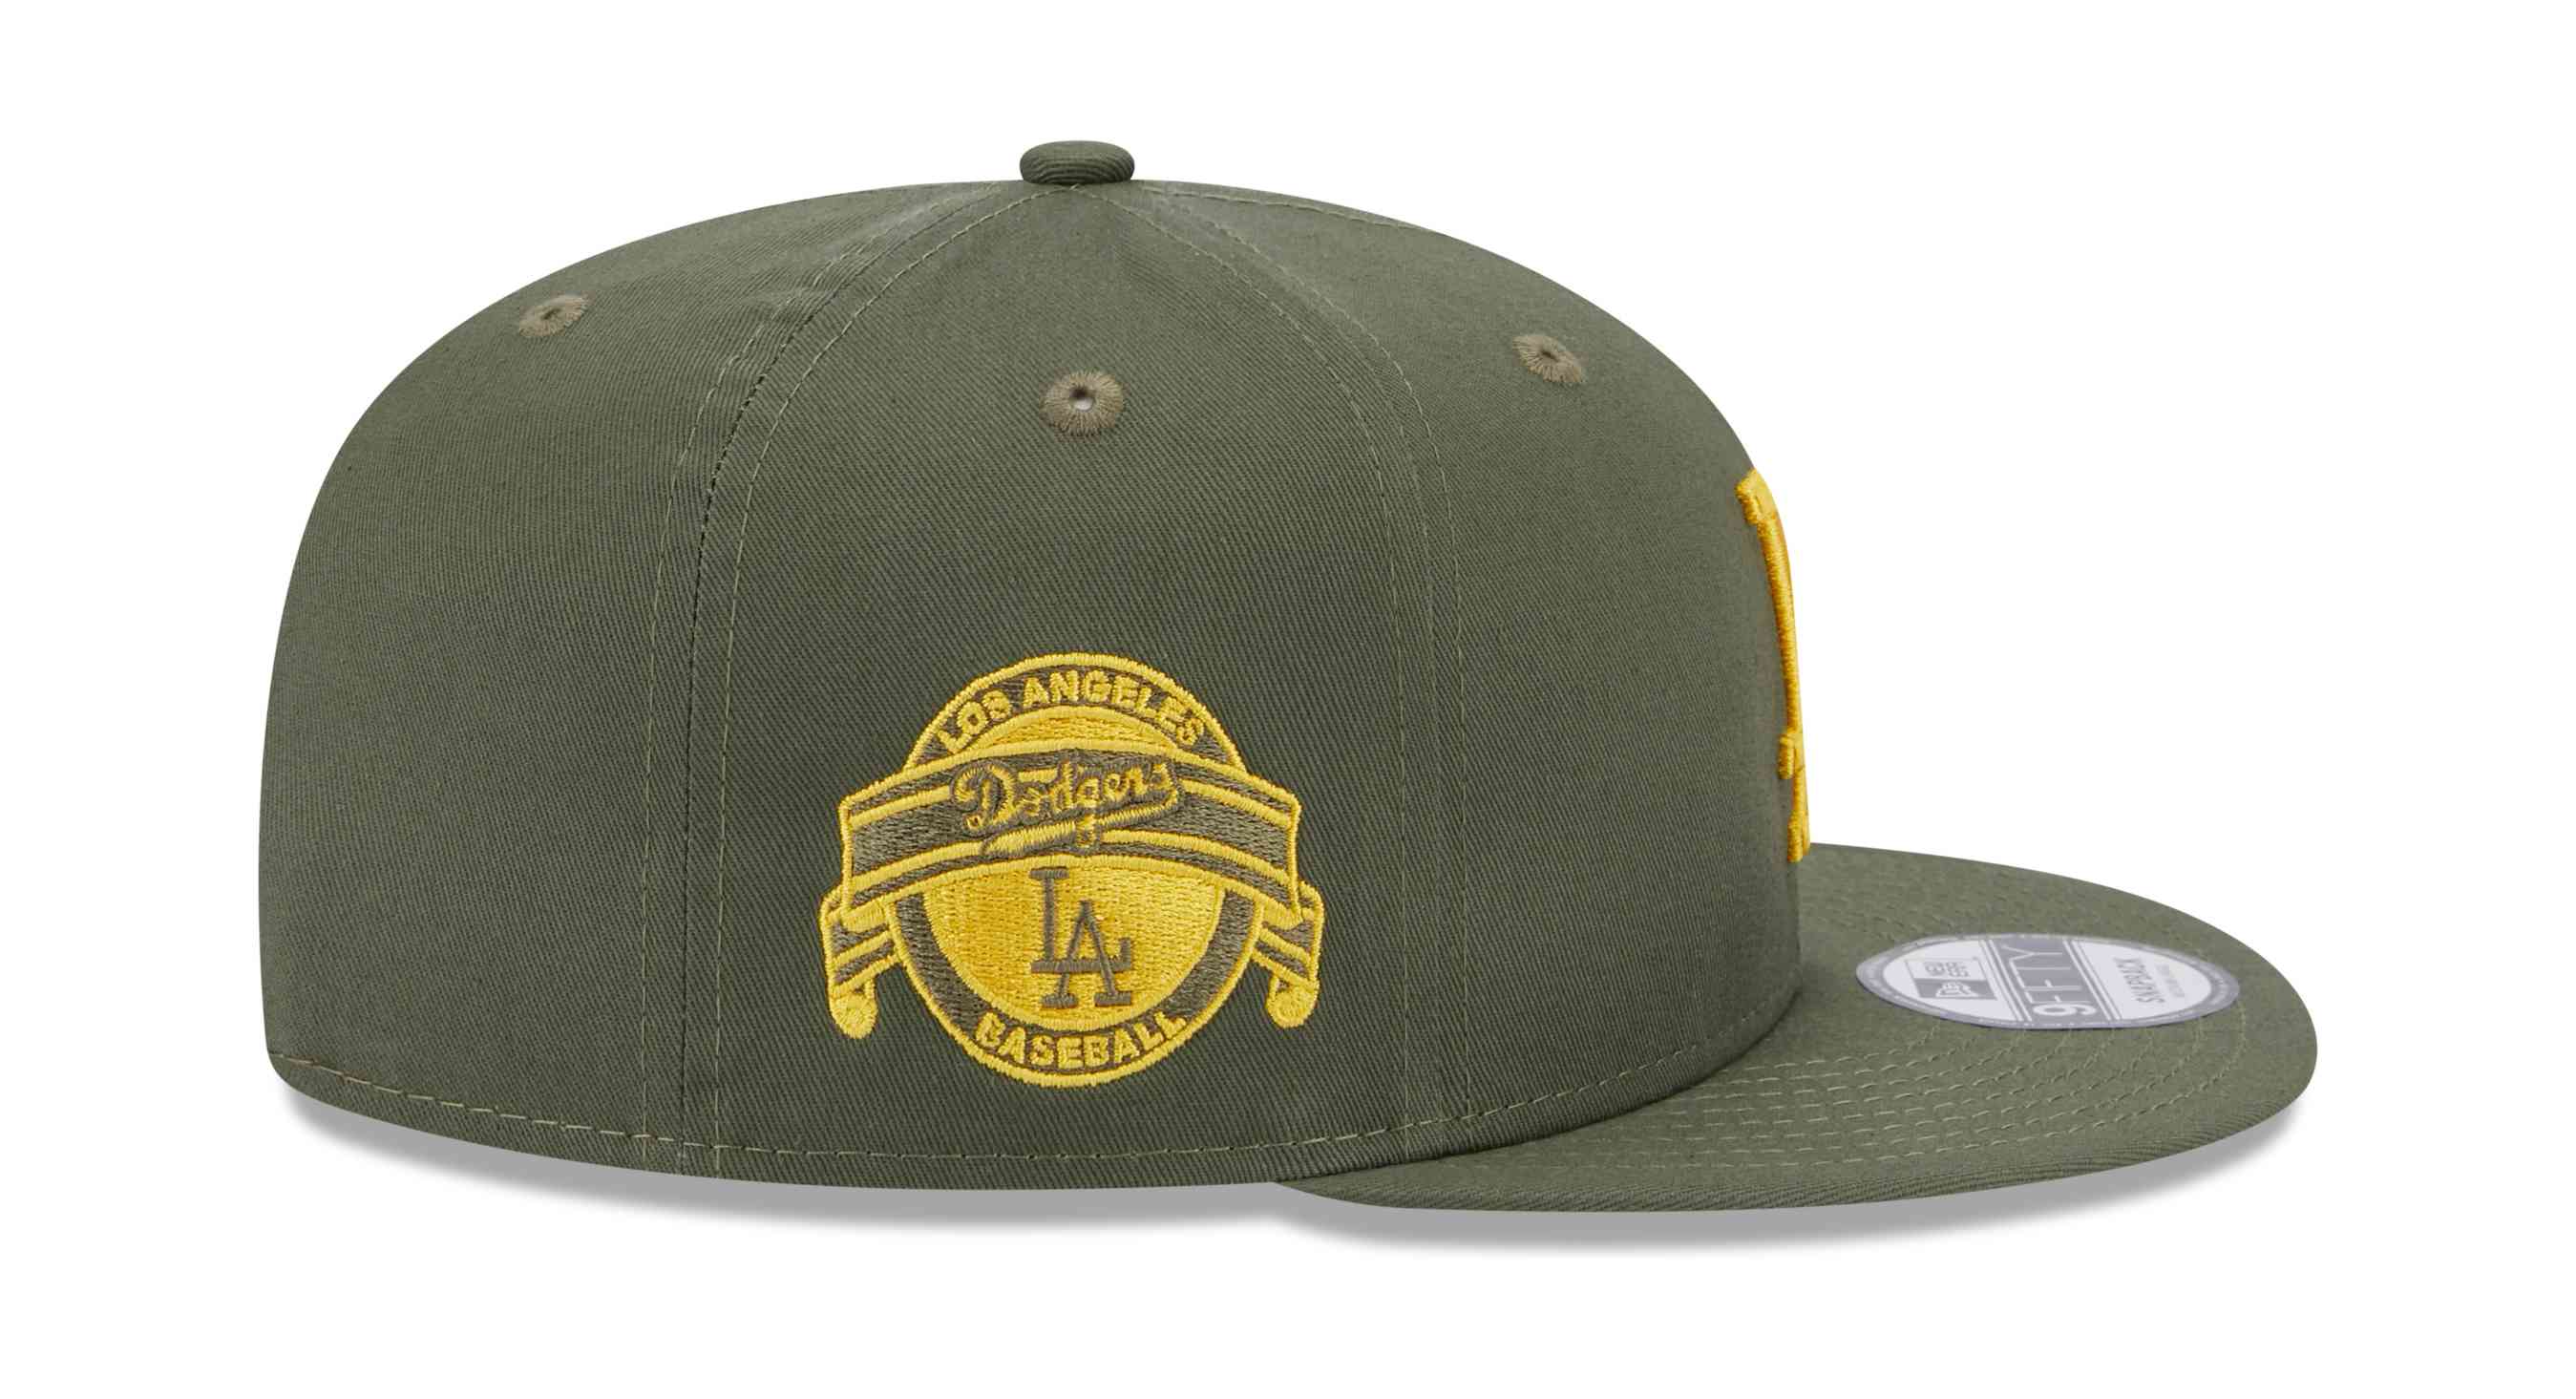 New Era - MLB Los Angeles Dodgers Side Patch 9Fifty Snapback Cap